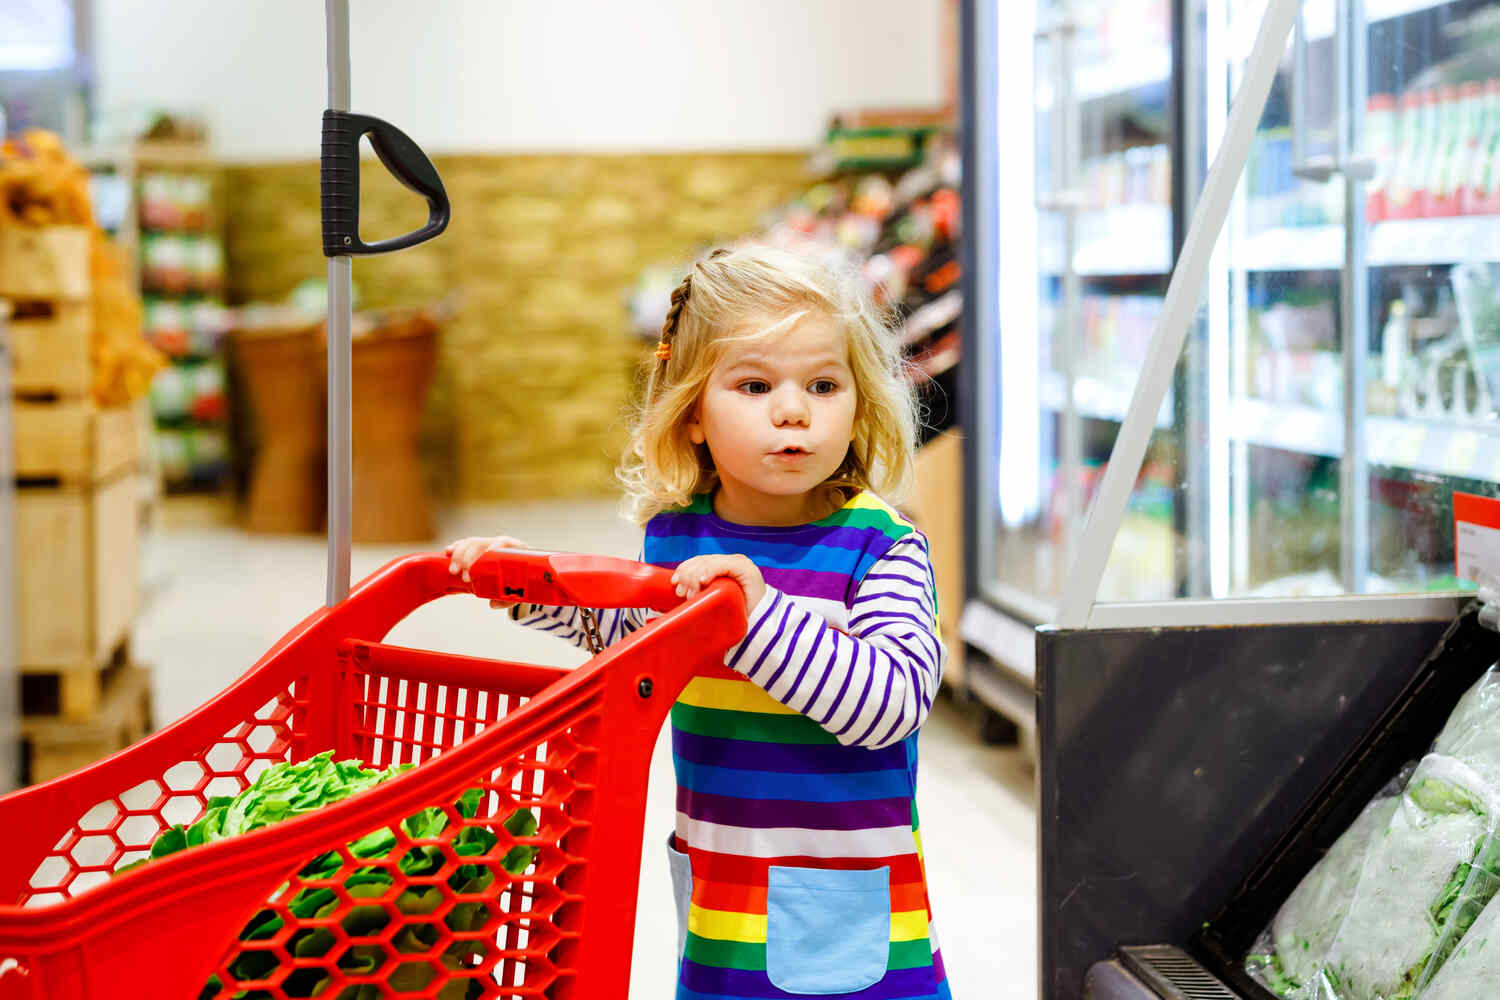 Make shopping fun for your toddler by teaching them different things